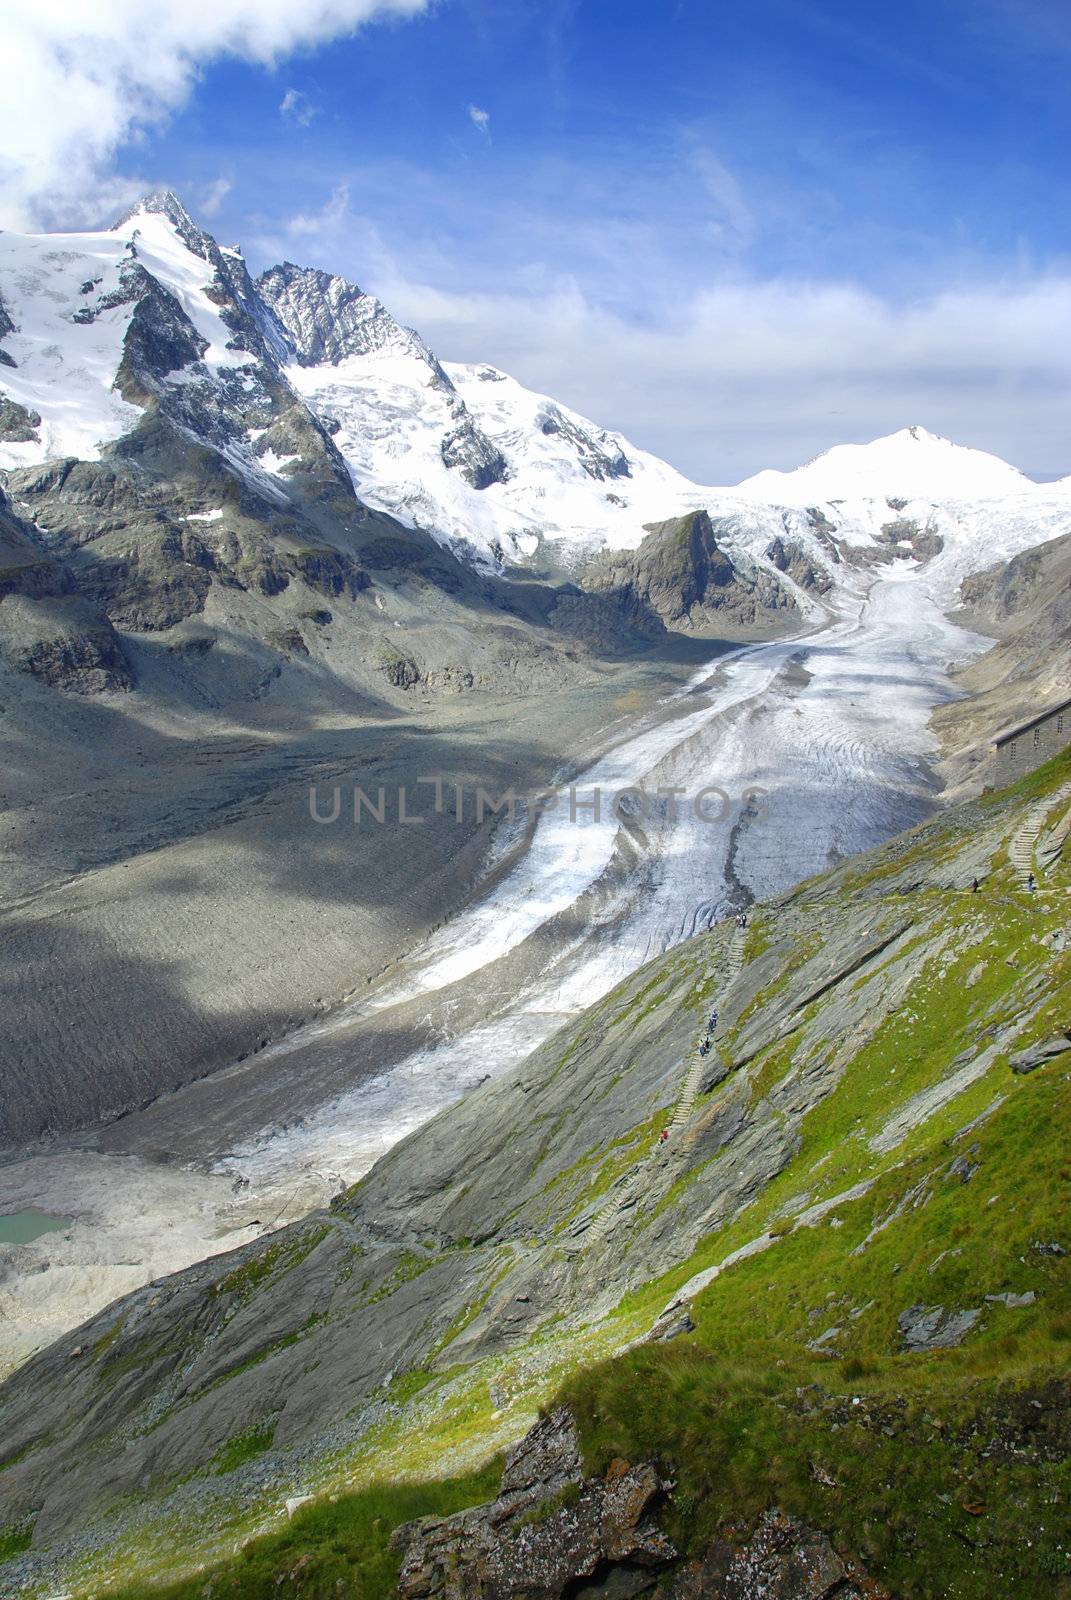 Famous German glacier Kaiser Franz is slowly melting due to global warming